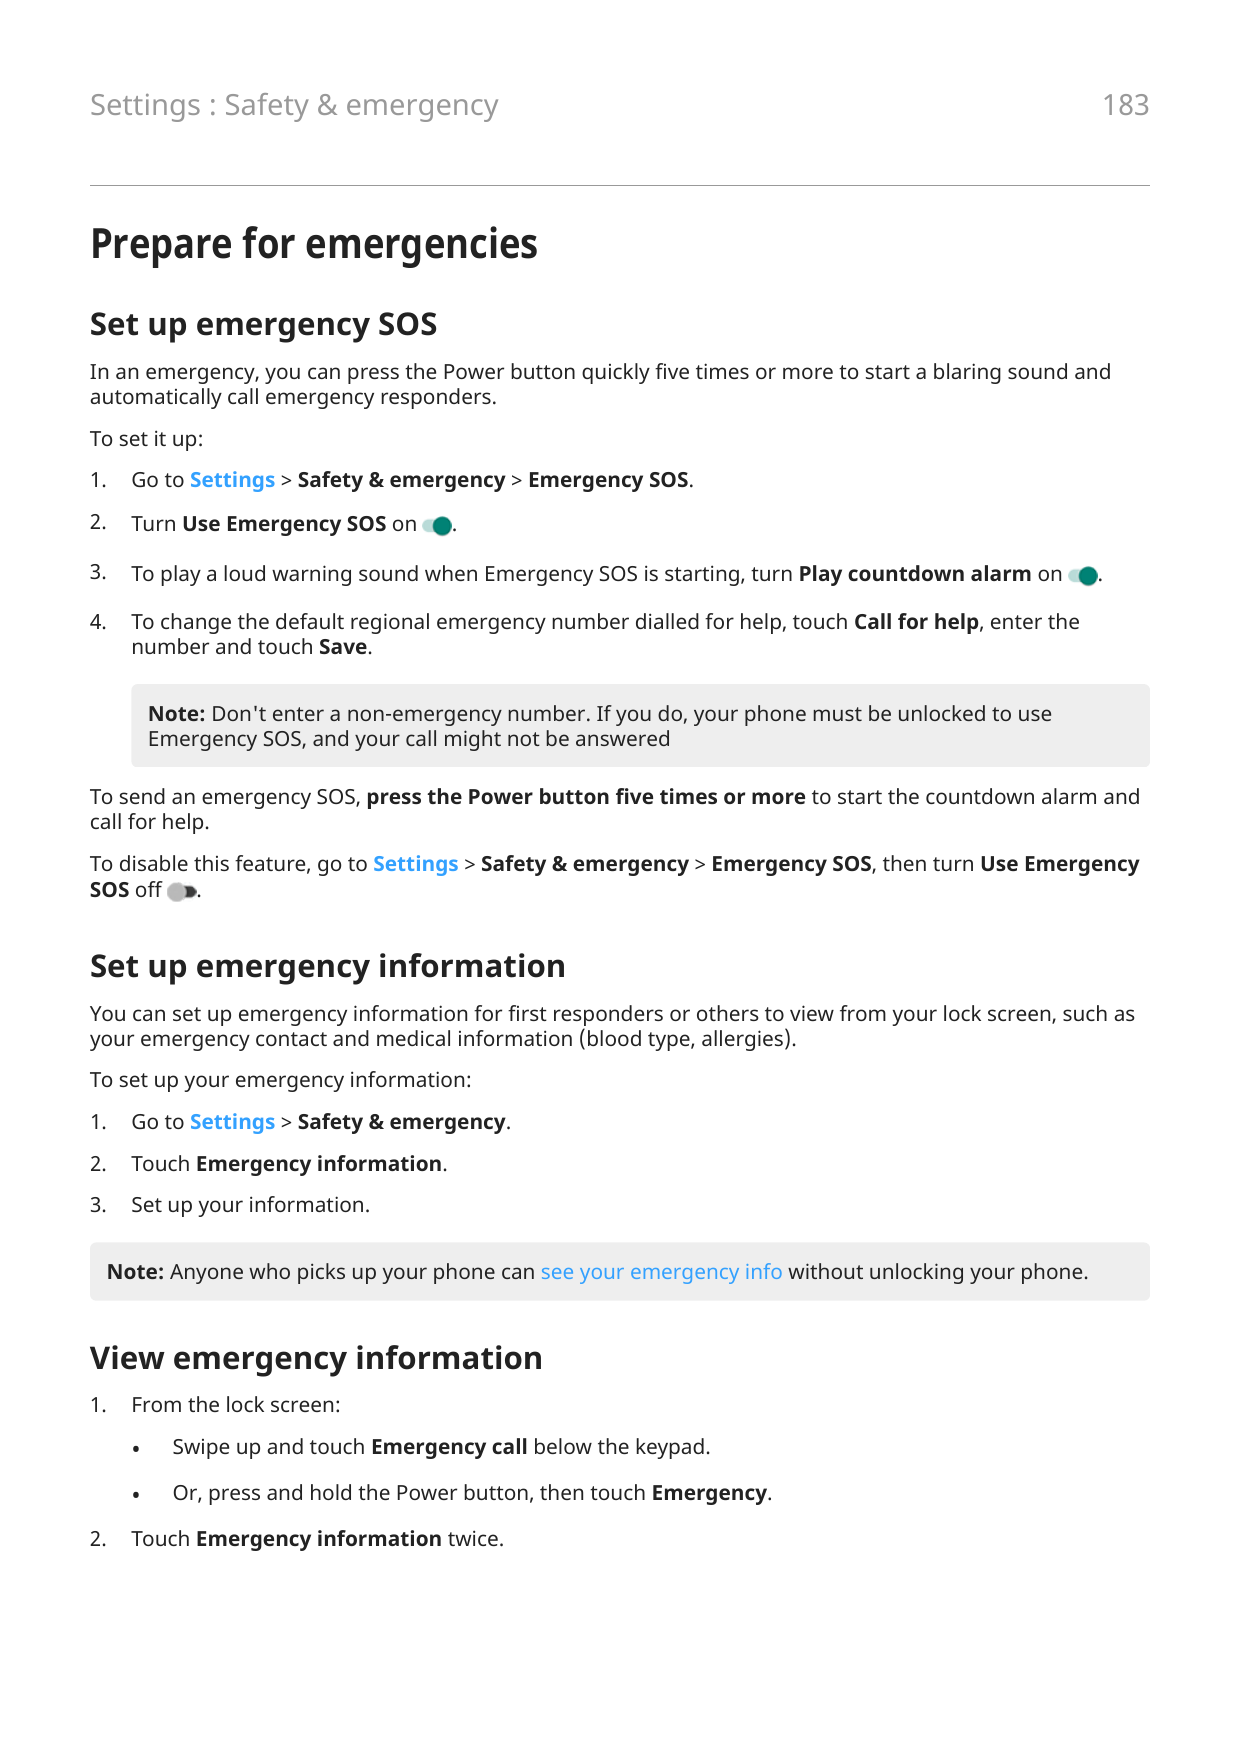 Settings : Safety & emergency183Prepare for emergenciesSet up emergency SOSIn an emergency, you can press the Power button quick